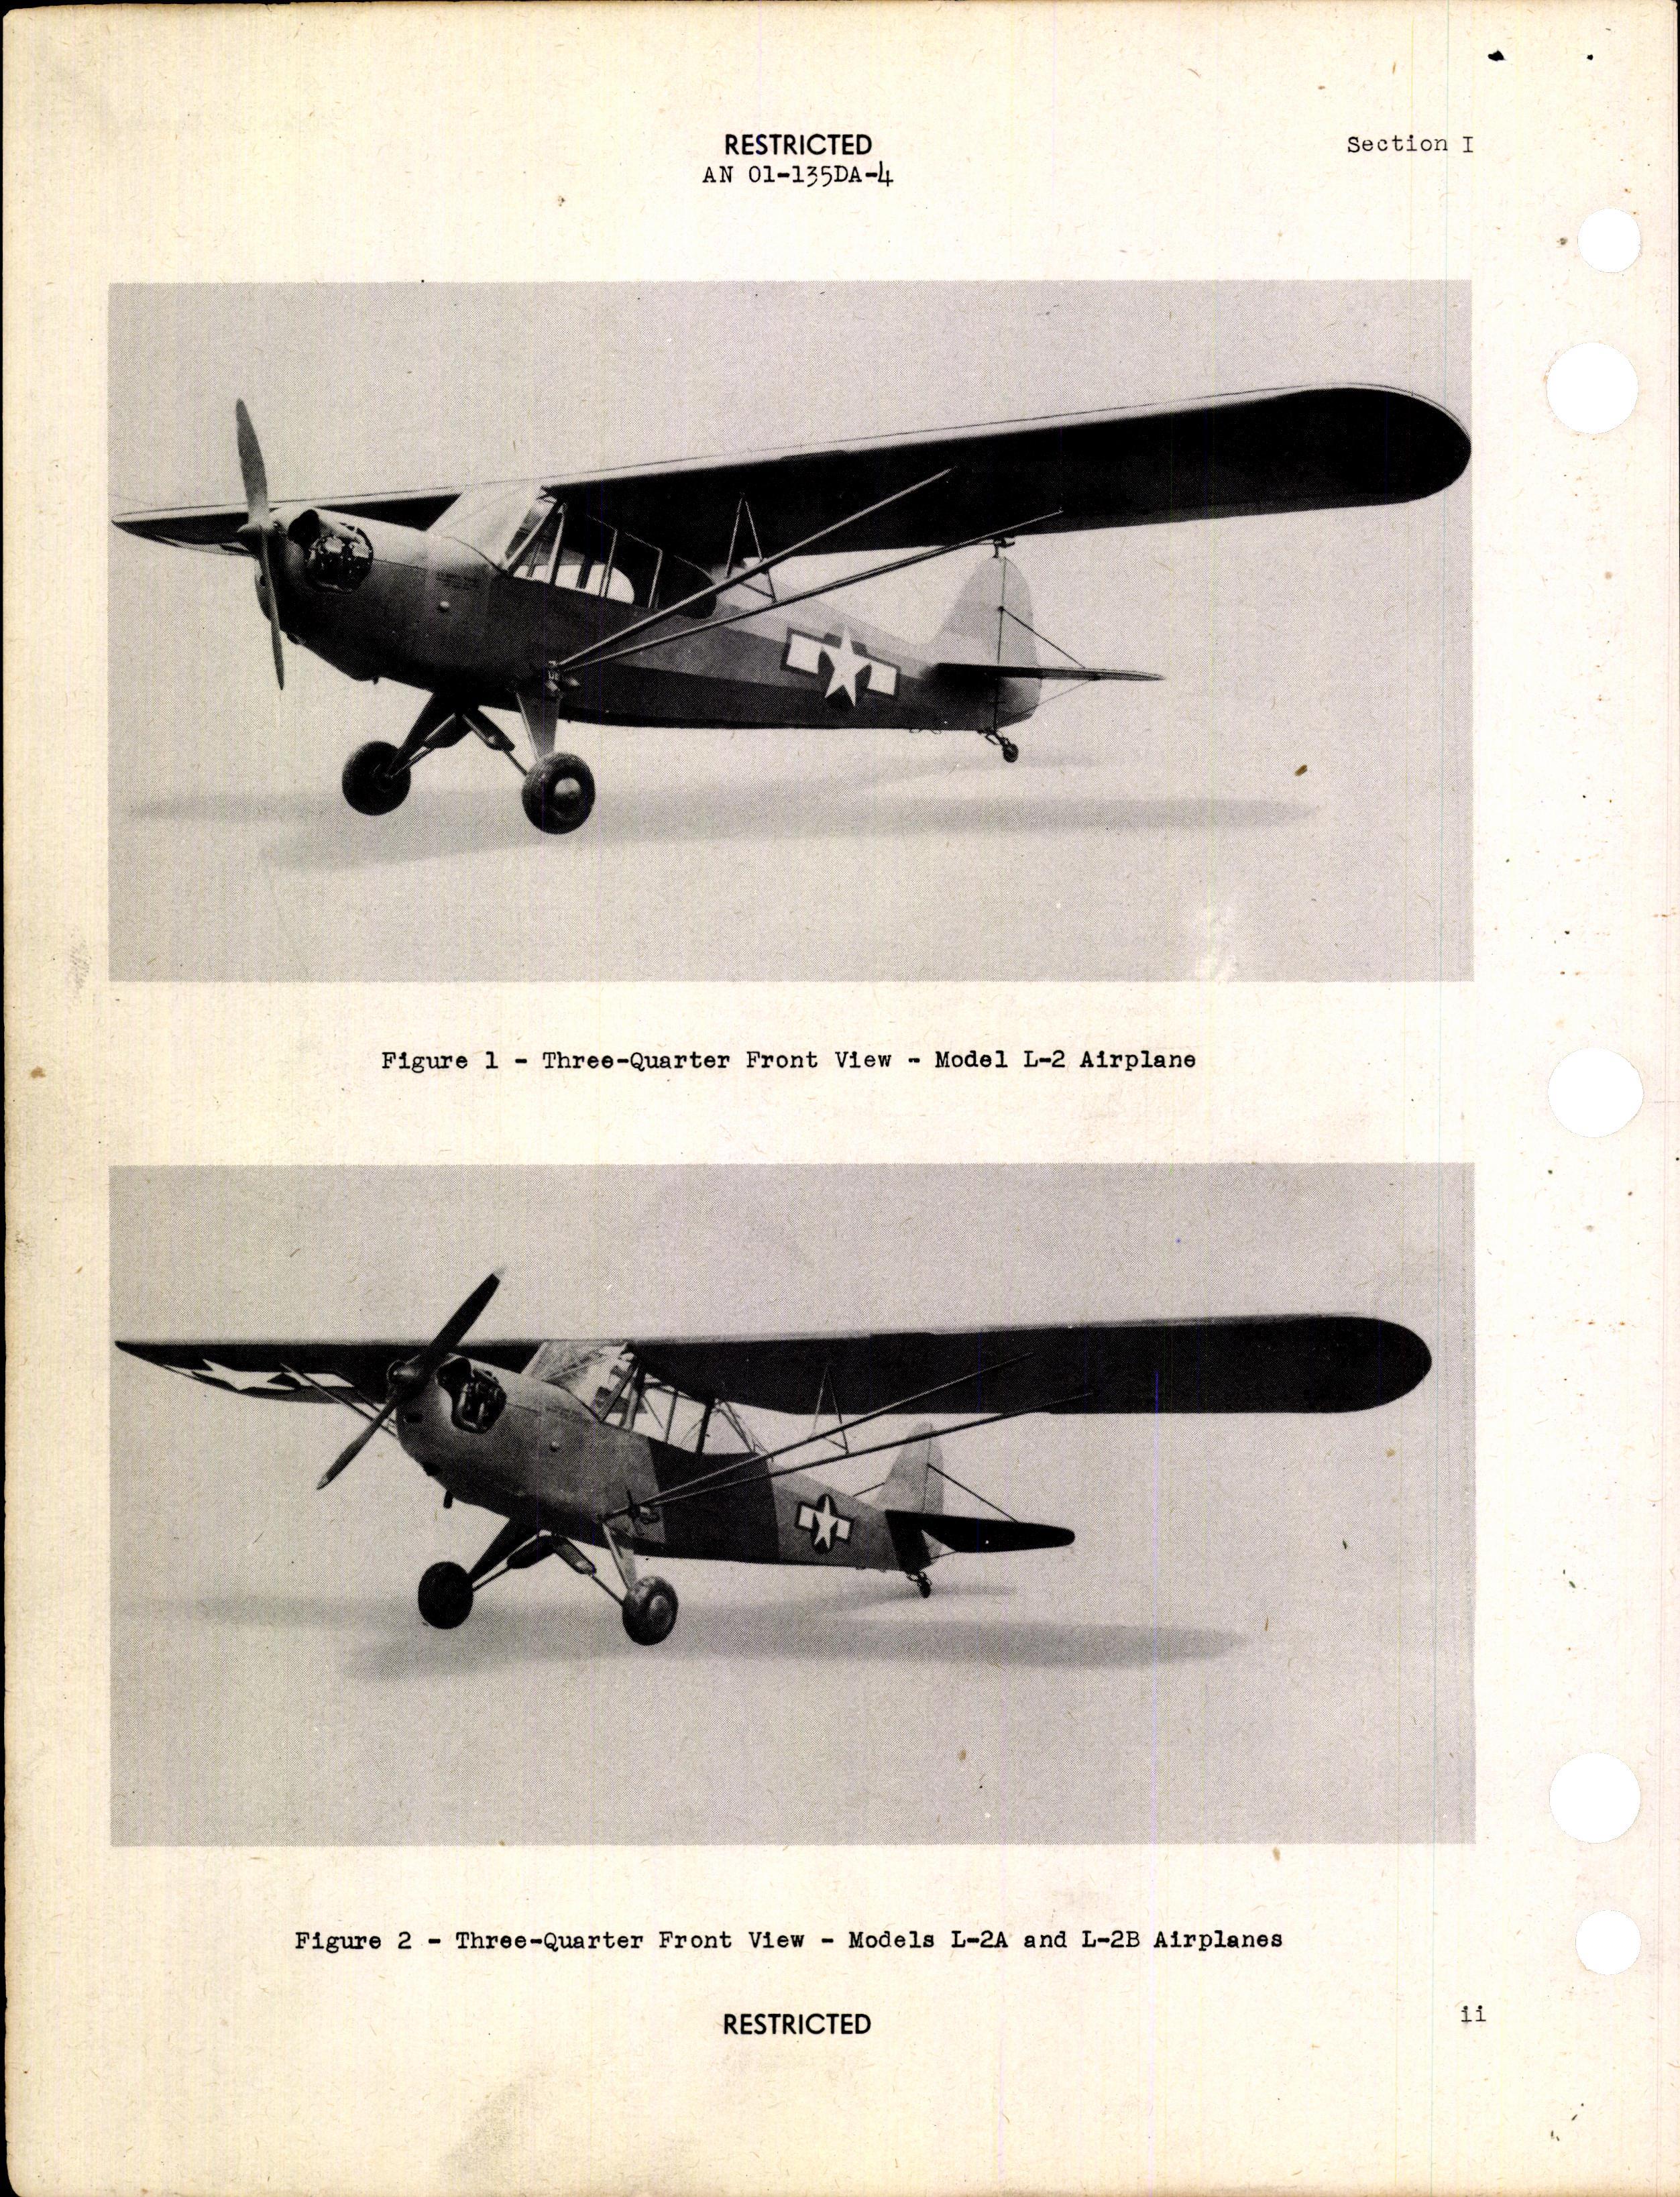 Sample page 4 from AirCorps Library document: Parts Catalog for L-2, L-2A, and L-2B Airplanes